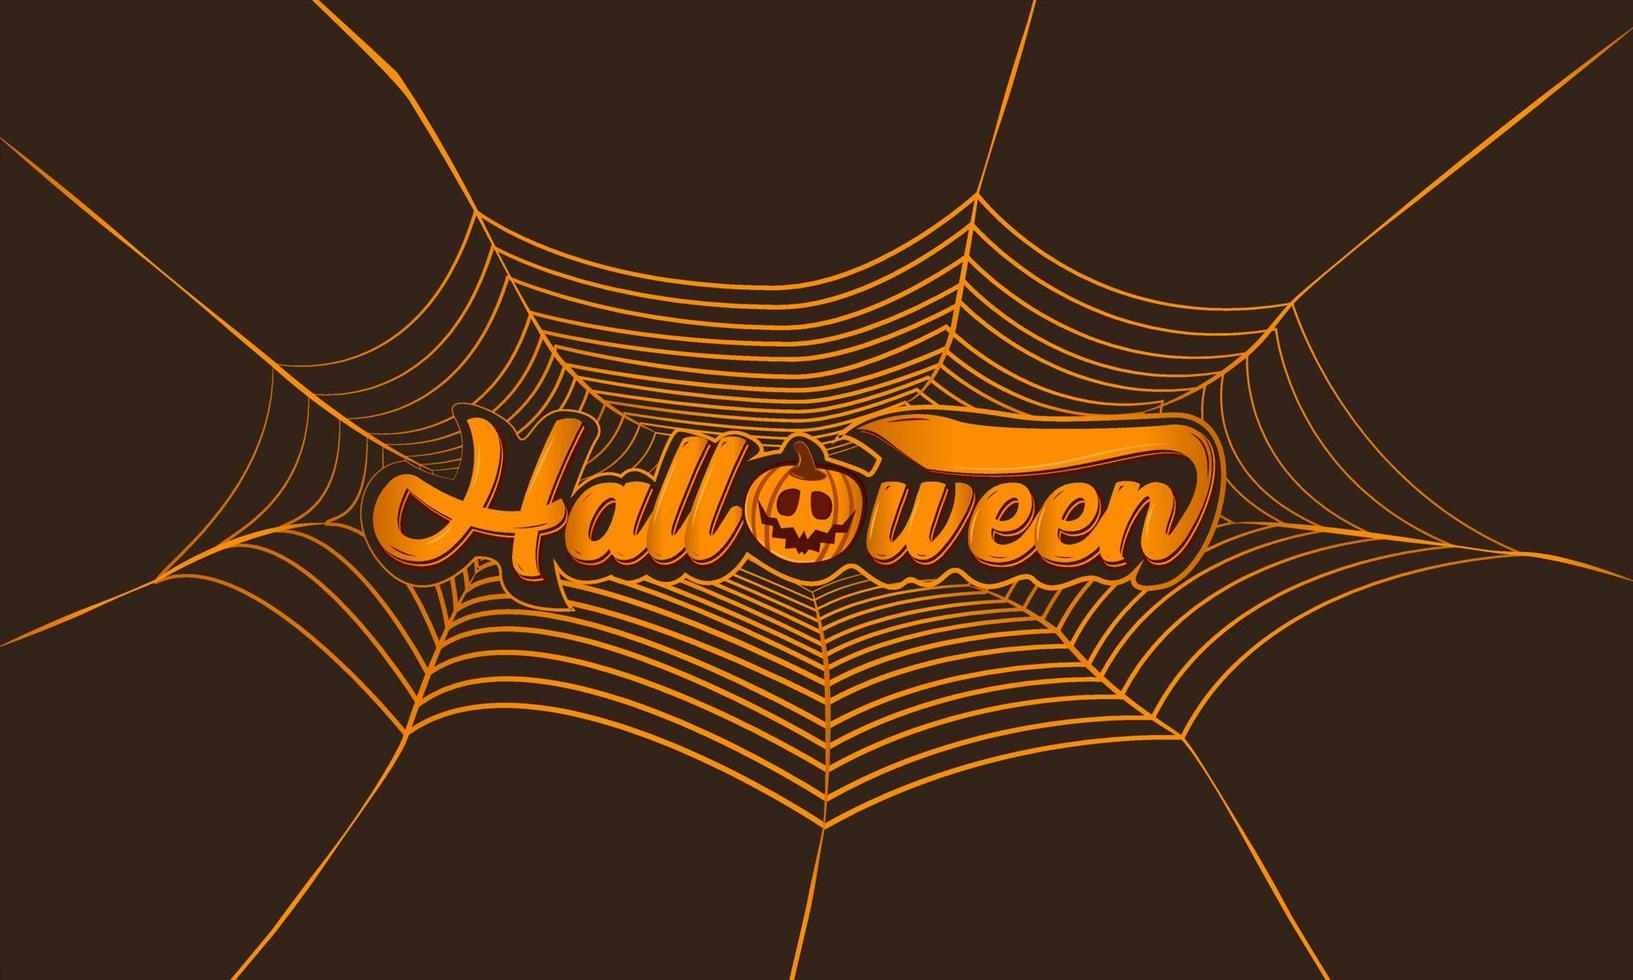 The typography reads Halloween and has a pumpkin character vector